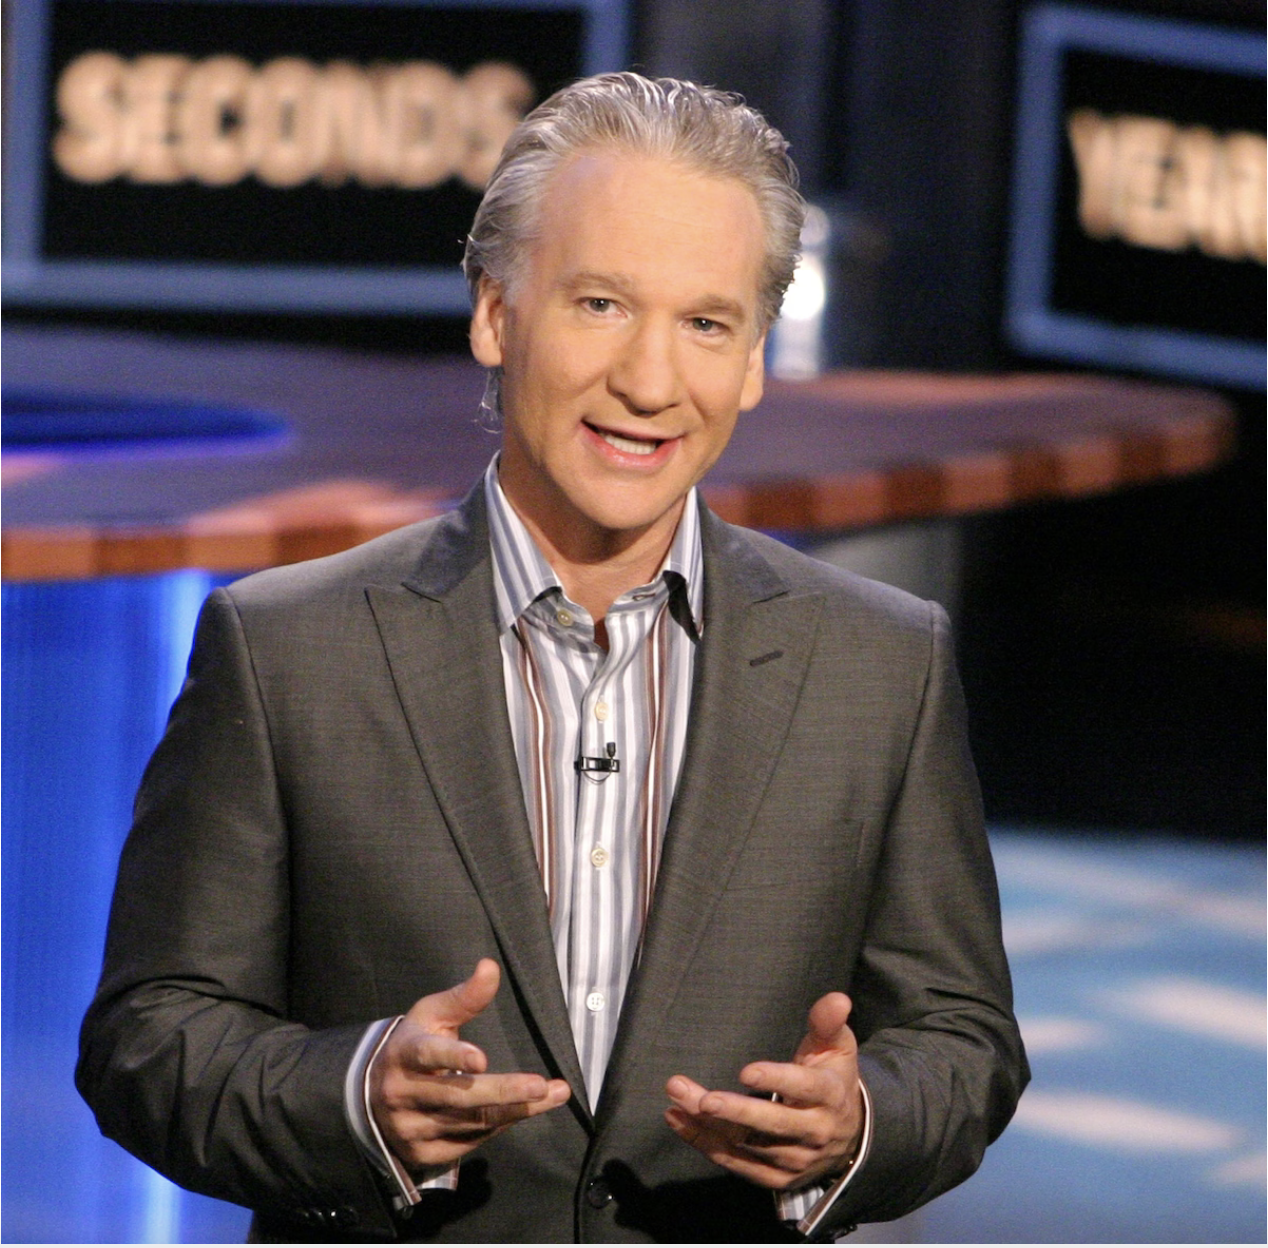 Bill Maher says his show ‘Real Time’ to return despite writers strike